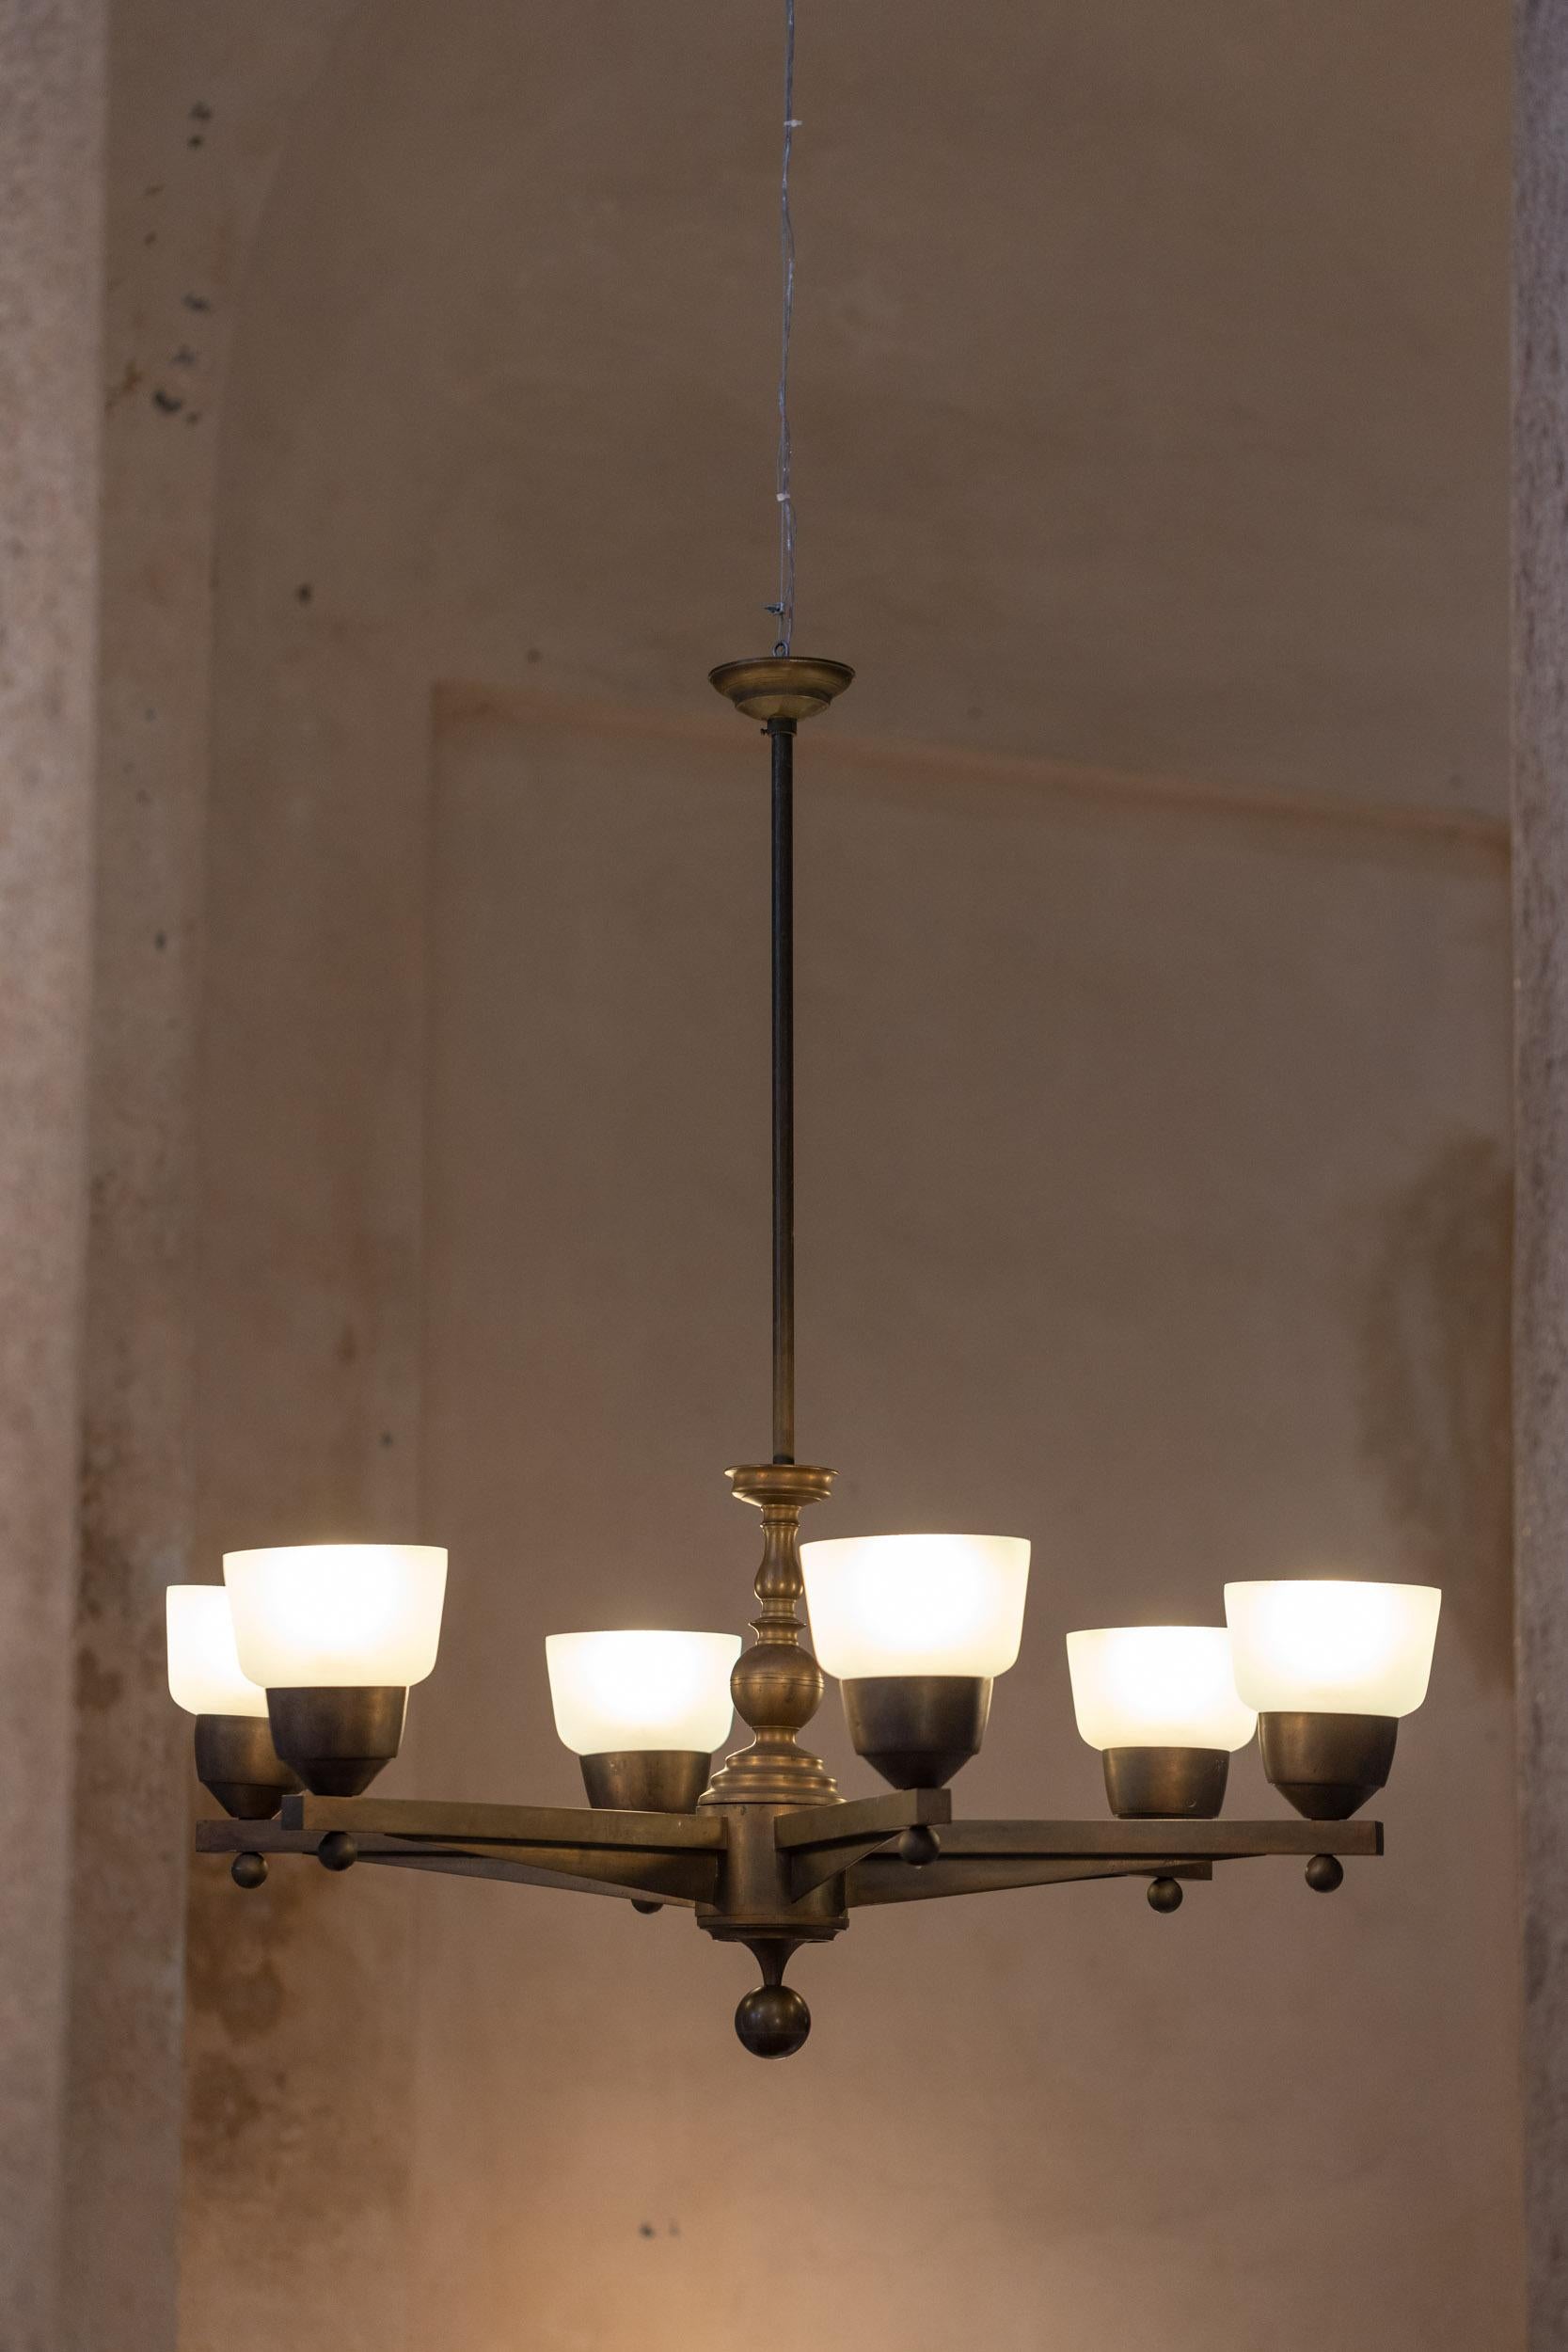 stunning six arms bronzr chandelier.
Original bronze structure with beautiful vintage patina. 
Each arm has its light with hand blown light blue Murano glass lampshade
by Venini

Italy 1930 c.